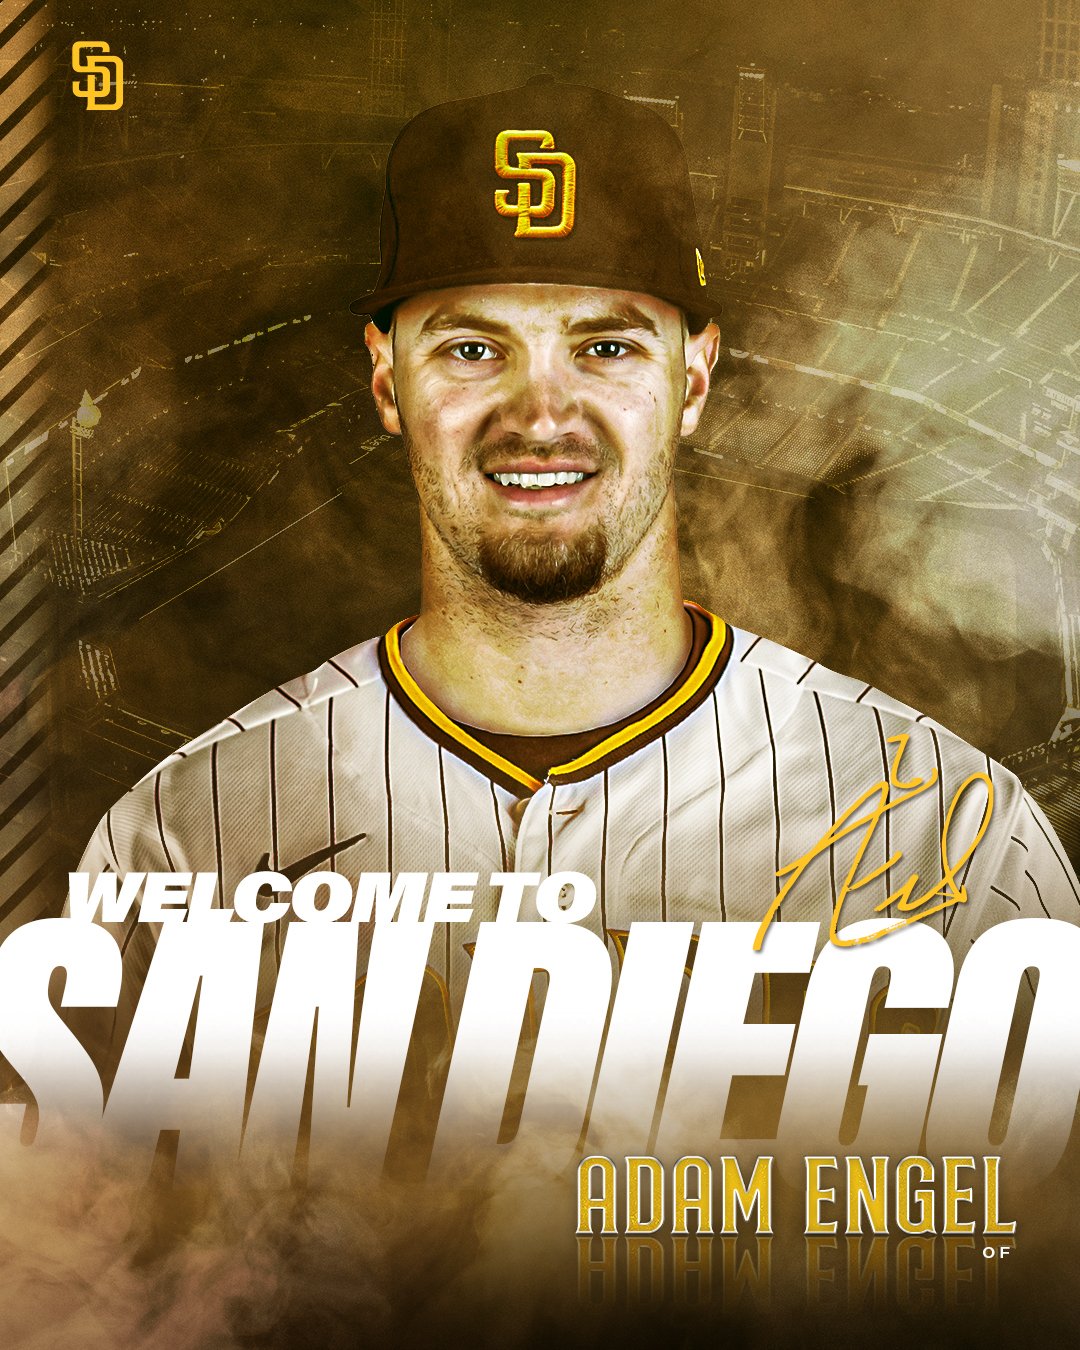 San Diego Padres added a new photo. - San Diego Padres